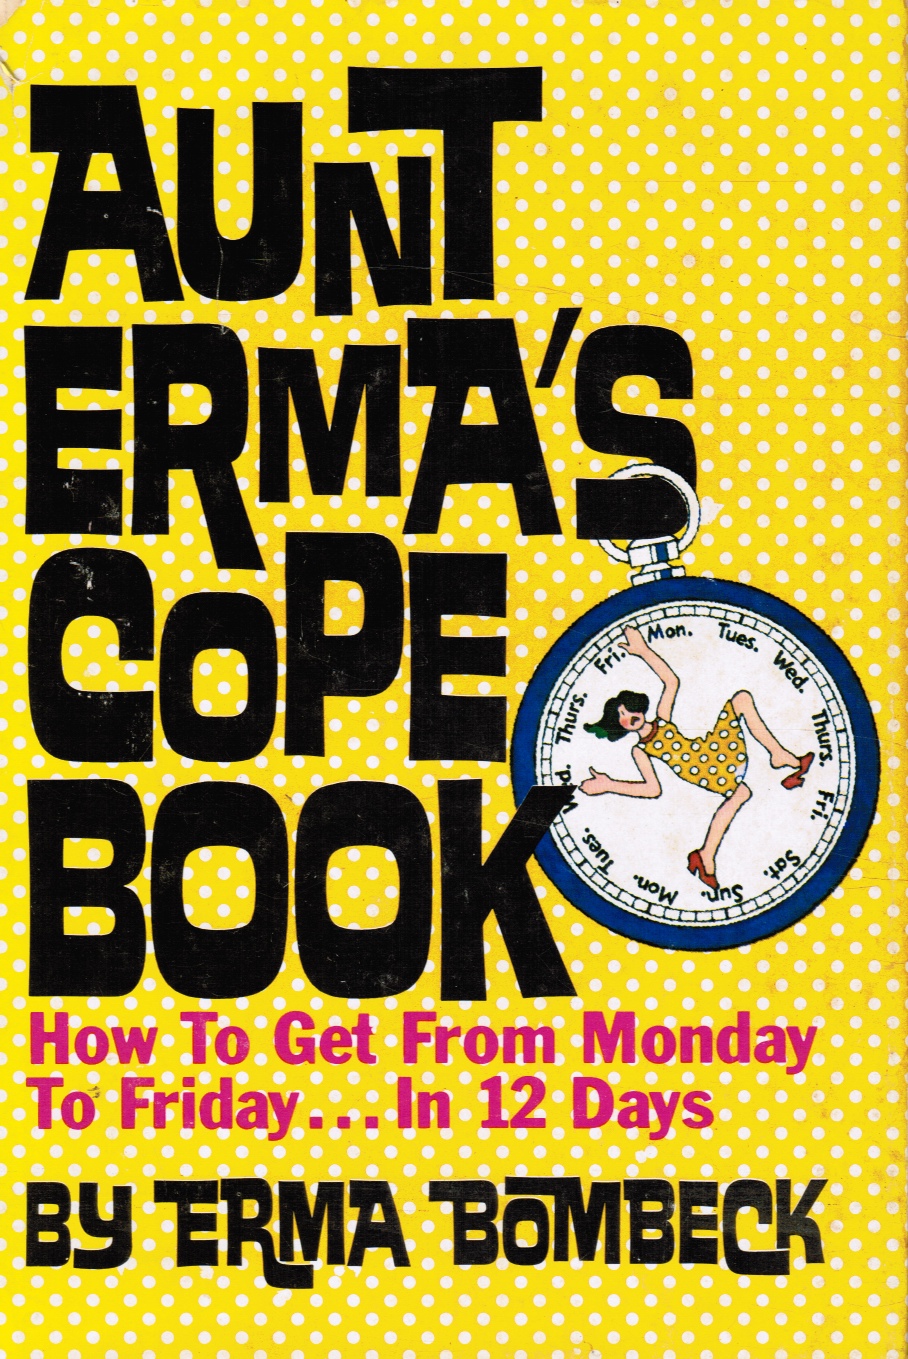 BOMBECK, ERMA - Aunt Erma's Cope Book: How to Get from Monday to Friday in 12 Days